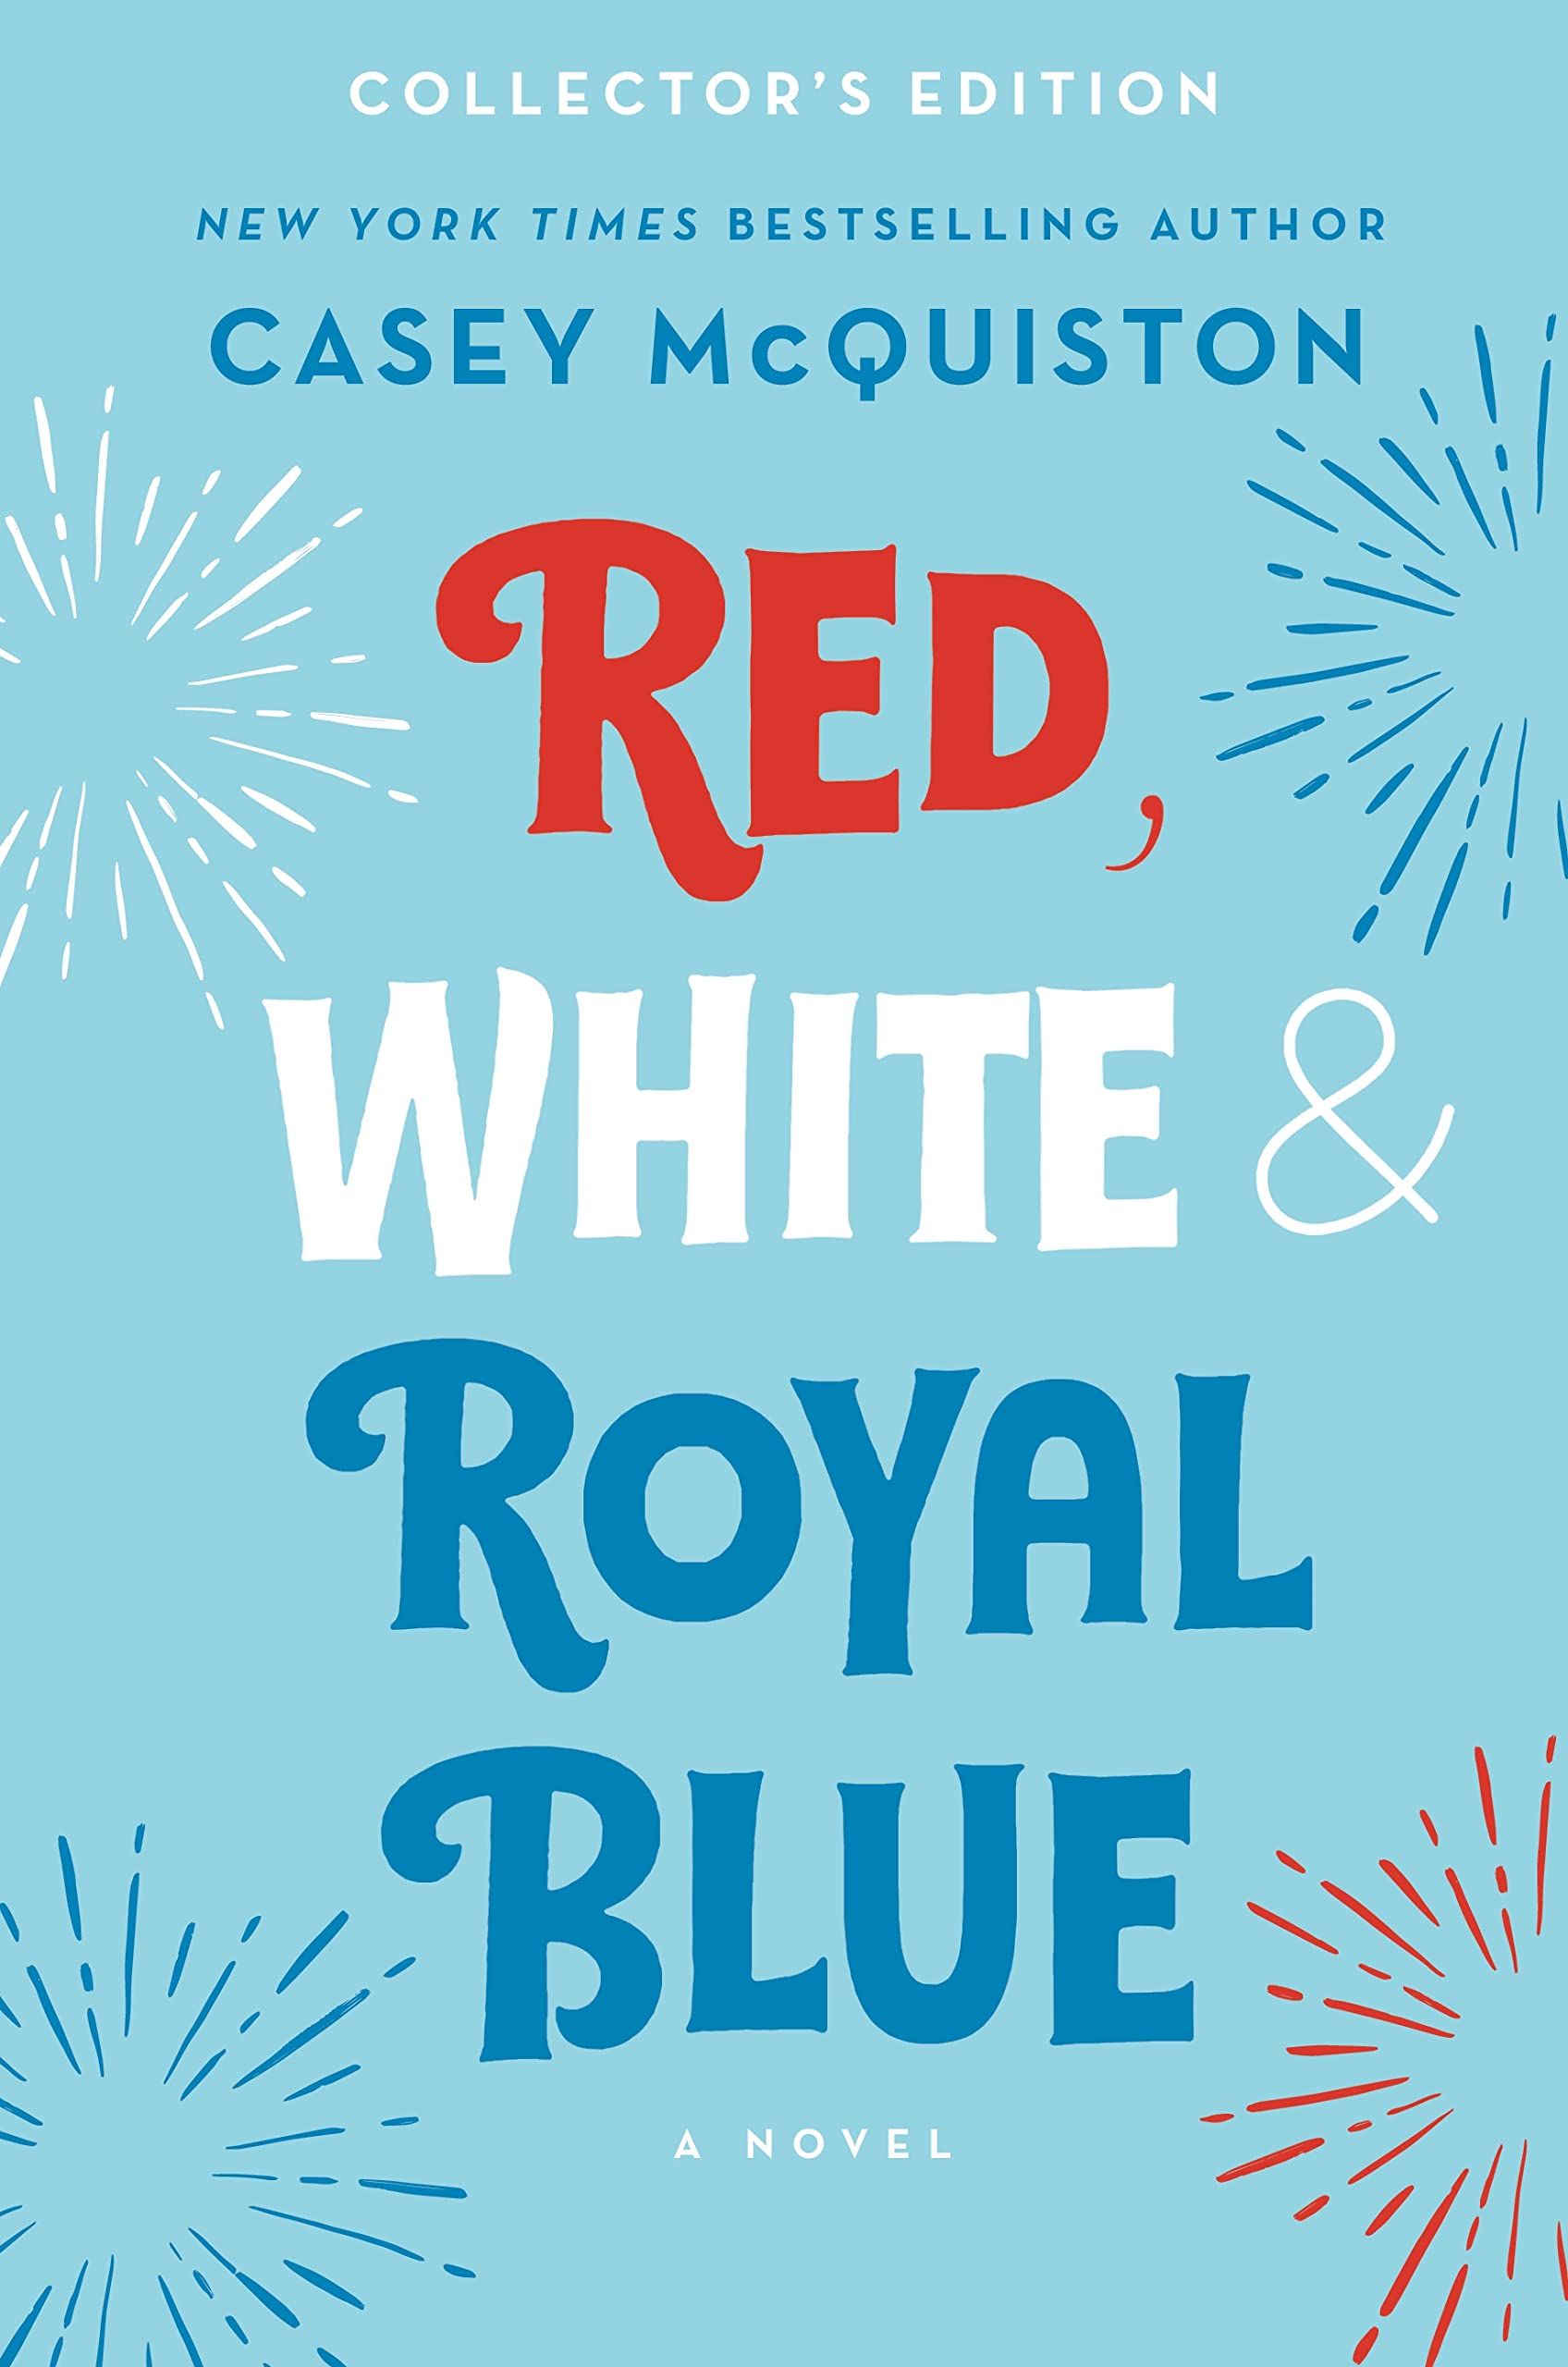 collector's edition of Red, White, and Royal Blue by Casey McQuiston, showing the text of the title in red, white, and blue against a light blue background